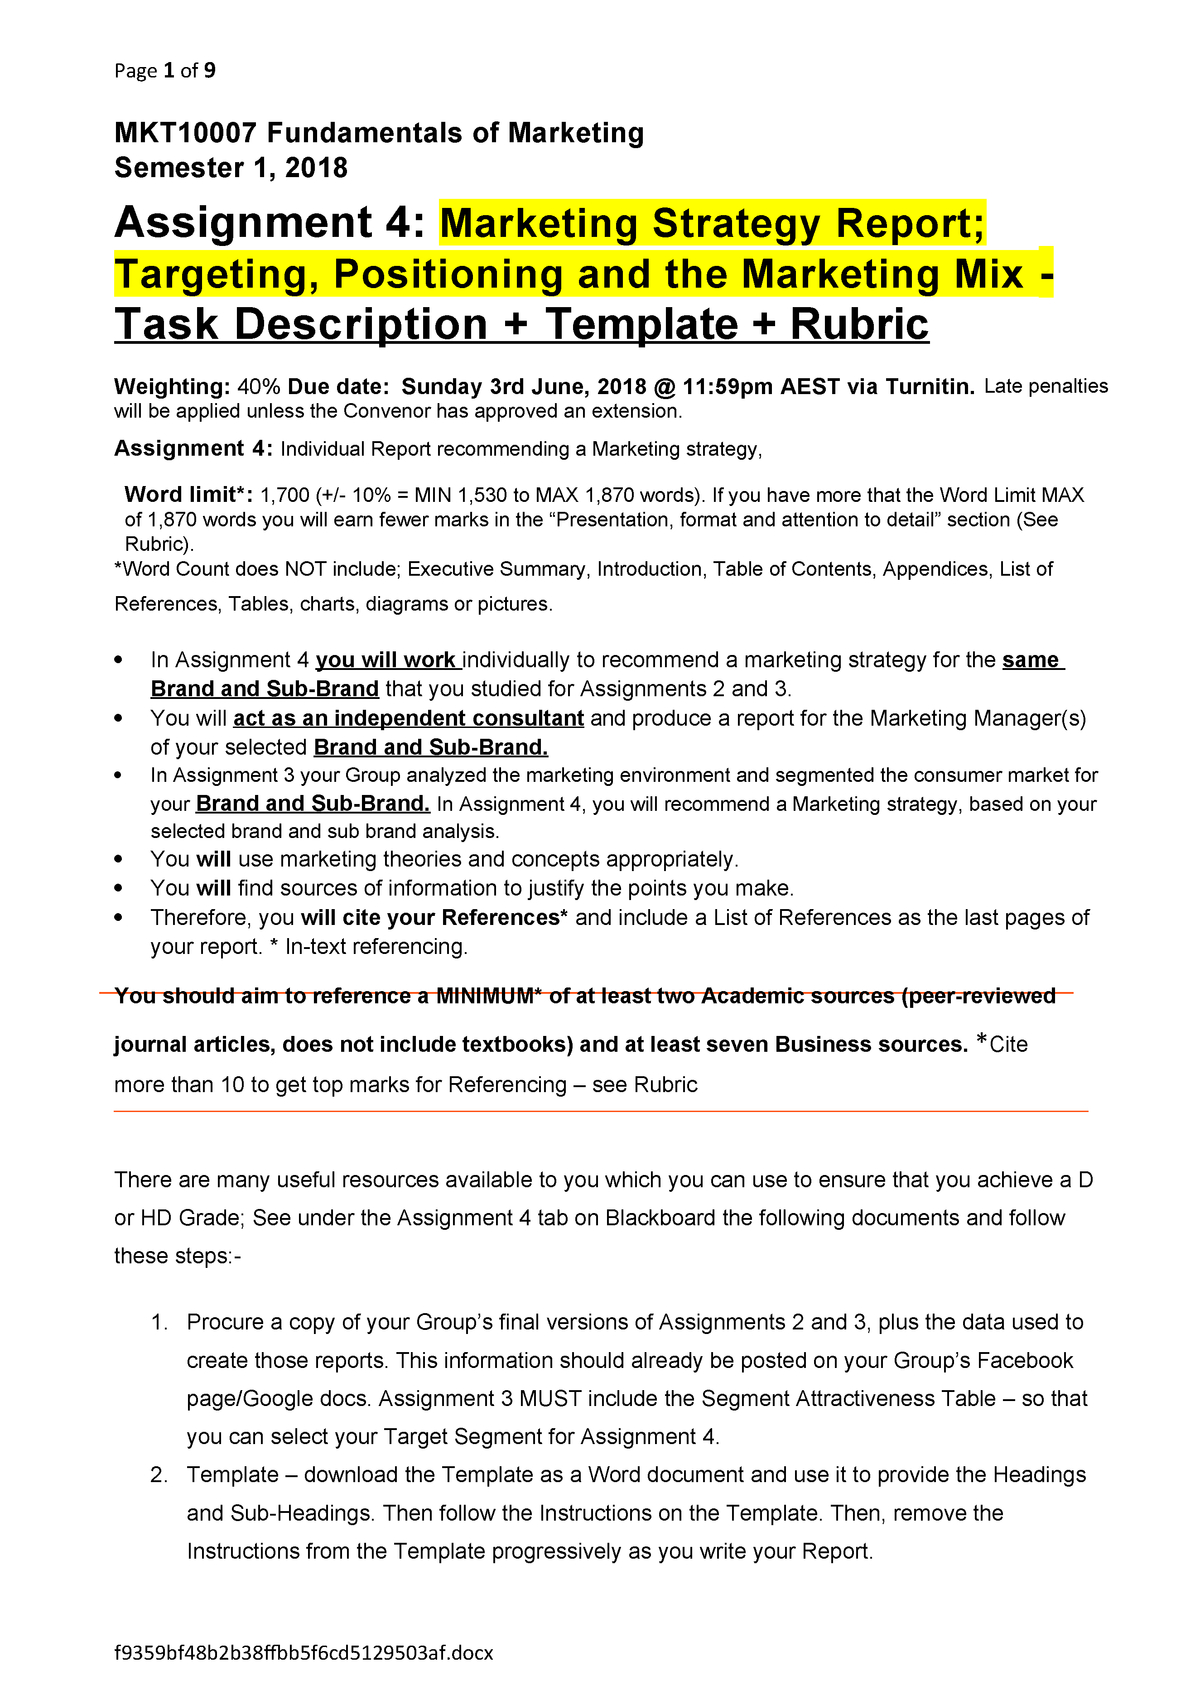 Mkt10007 Assignment 4 Template & Rubric S1,18 – Marketing Throughout Assignment Report Template